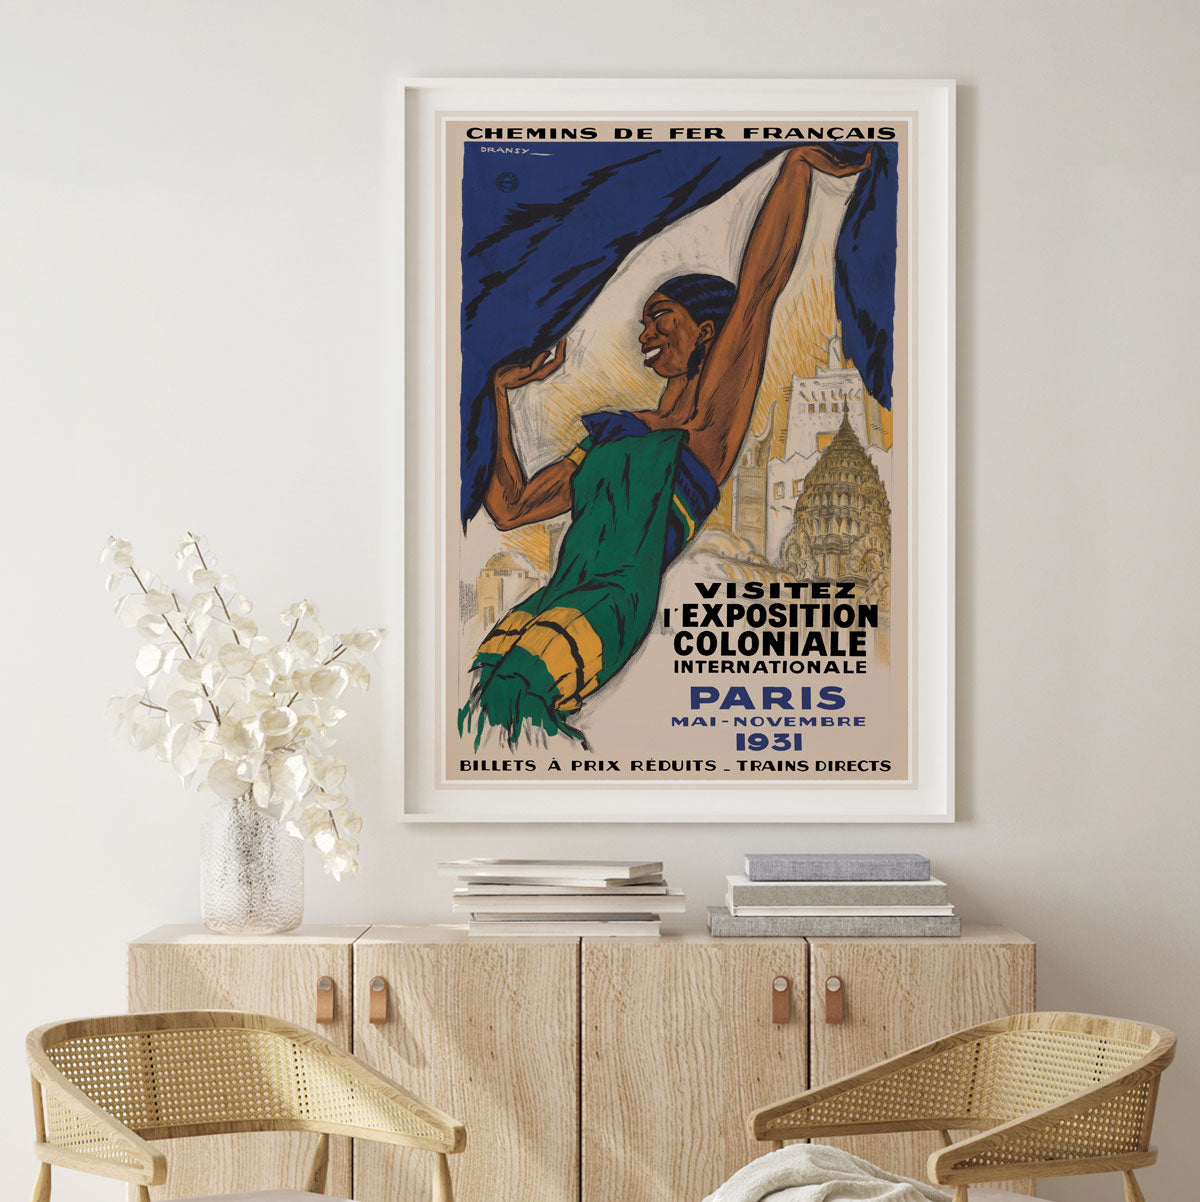 Exposition Coloniale Paris vintage advertising poster from Places We Luv